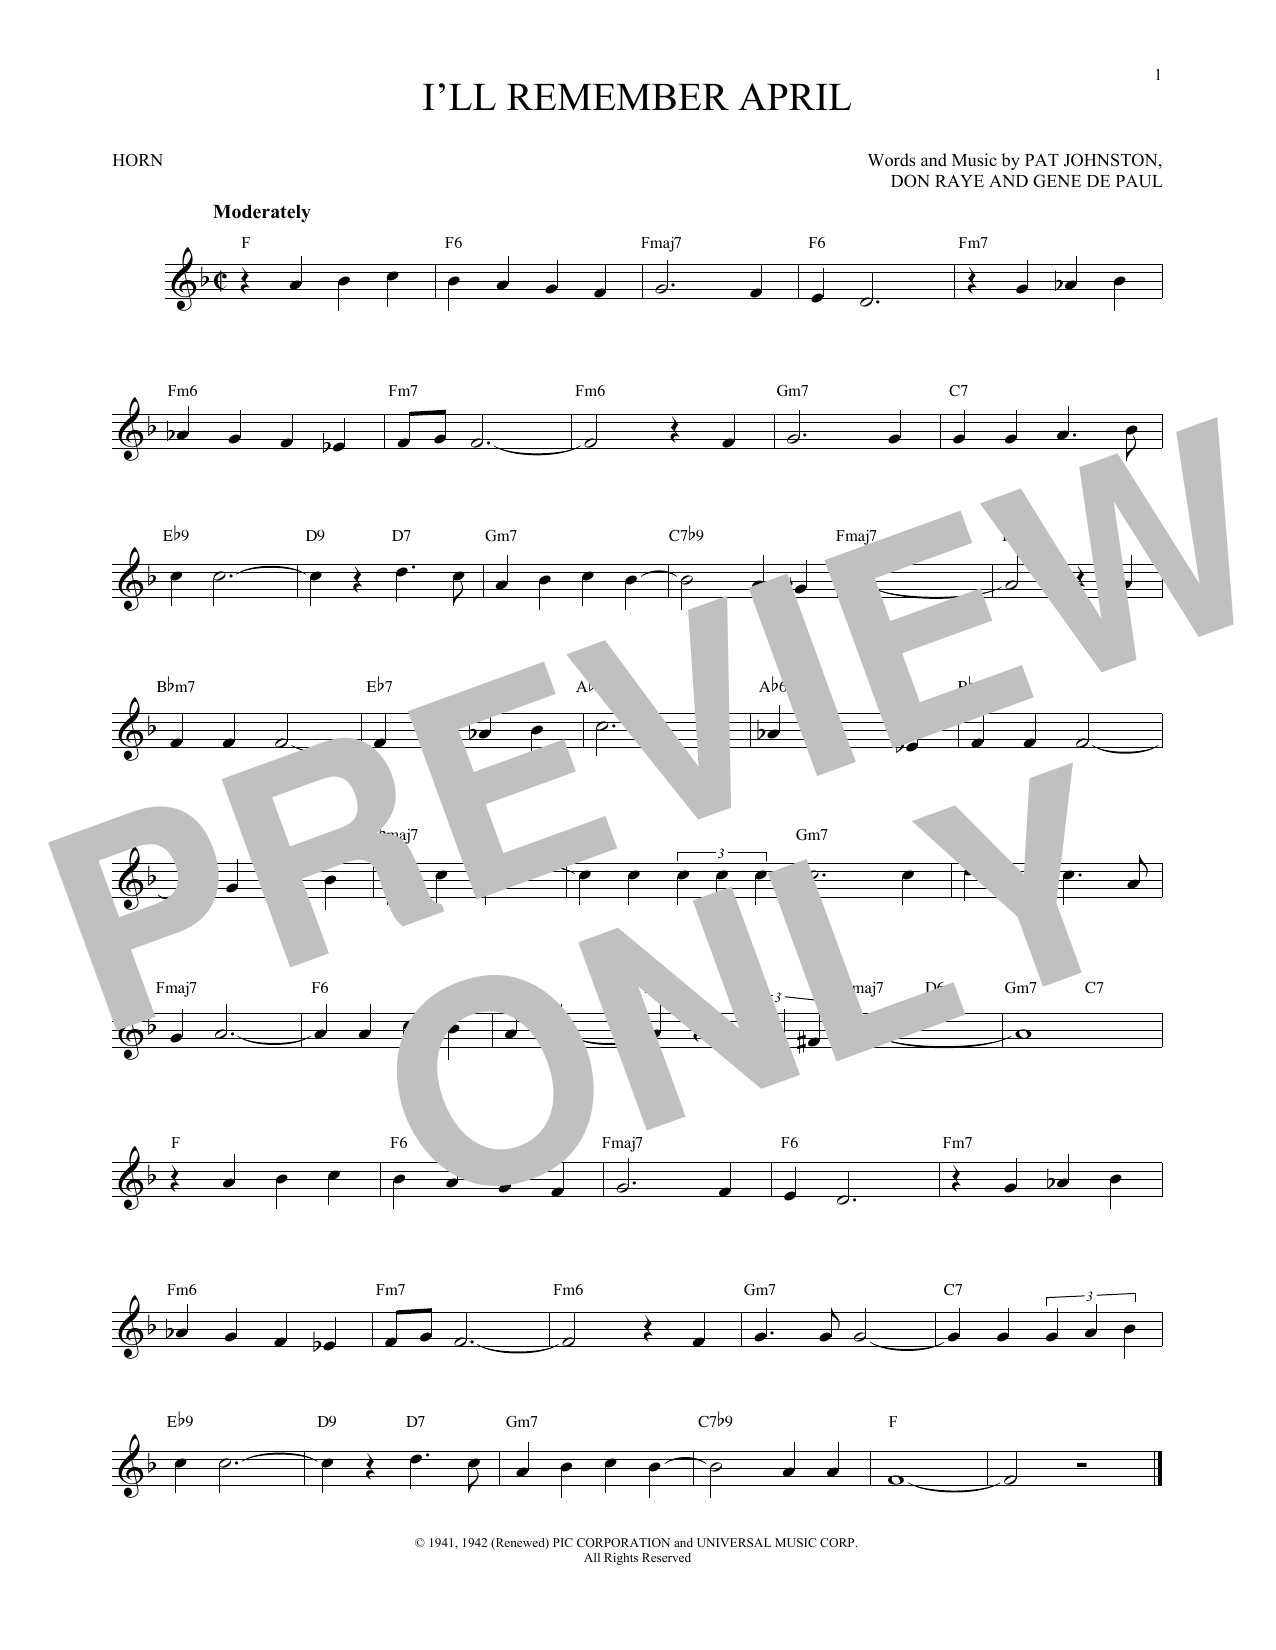 Download Woody Herman & His Orchestra I'll Remember April Sheet Music